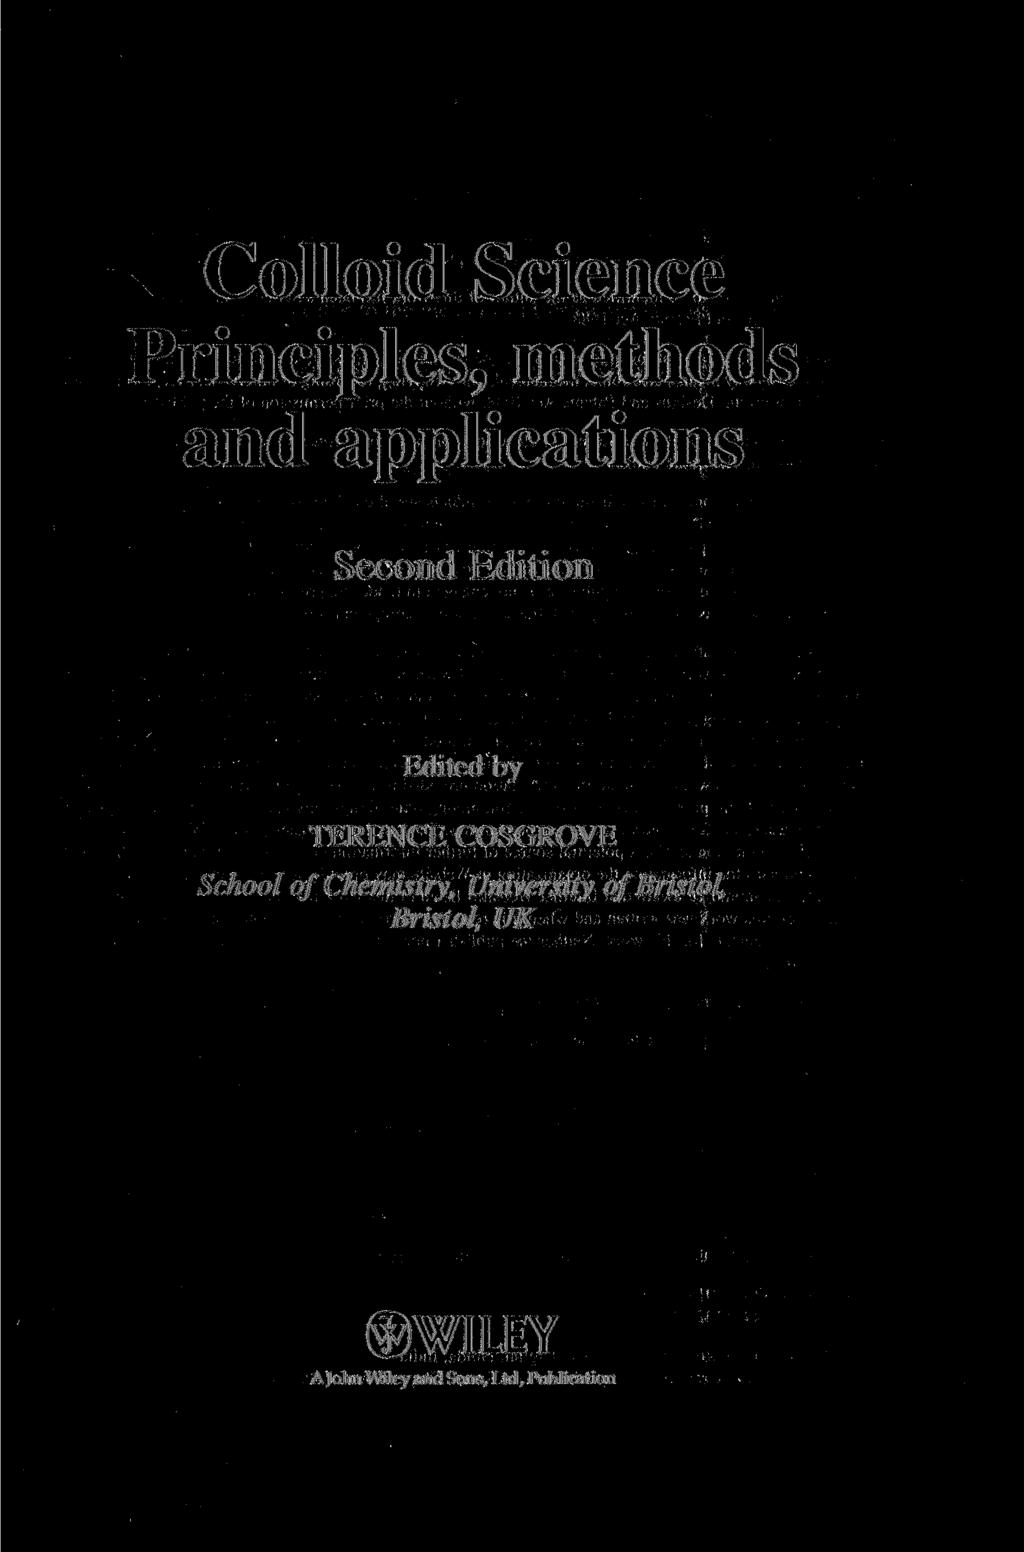 Colloid Science Principles, methods and applications Second Edition Edited by TERENCE COSGROVE